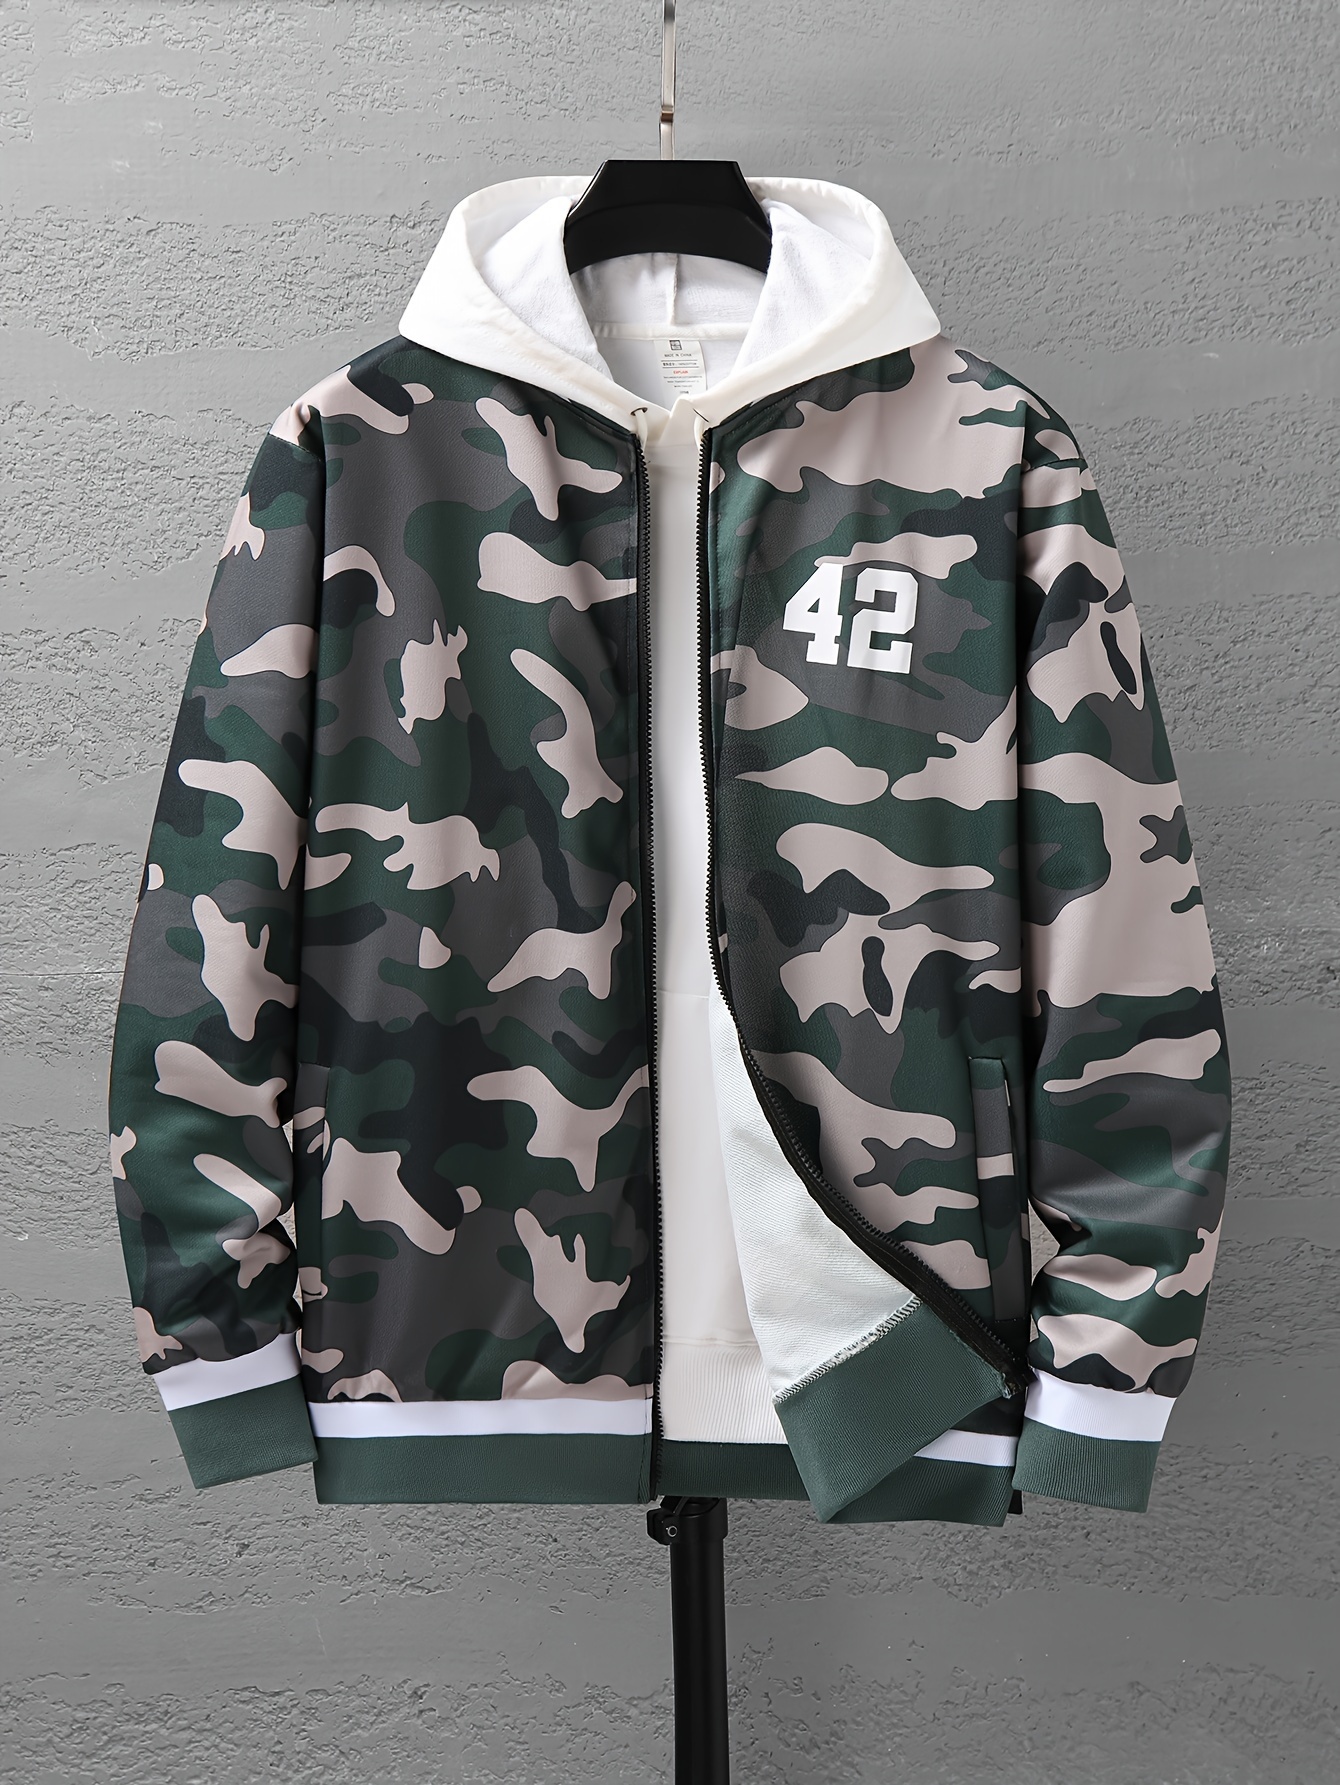 Plus Size Men's Camouflage #42 Print Baseball Jacket Oversized Cool Handsome Band Collar Jacket for Big & Tall, Casual Long Sleeve Zip Up Jacket